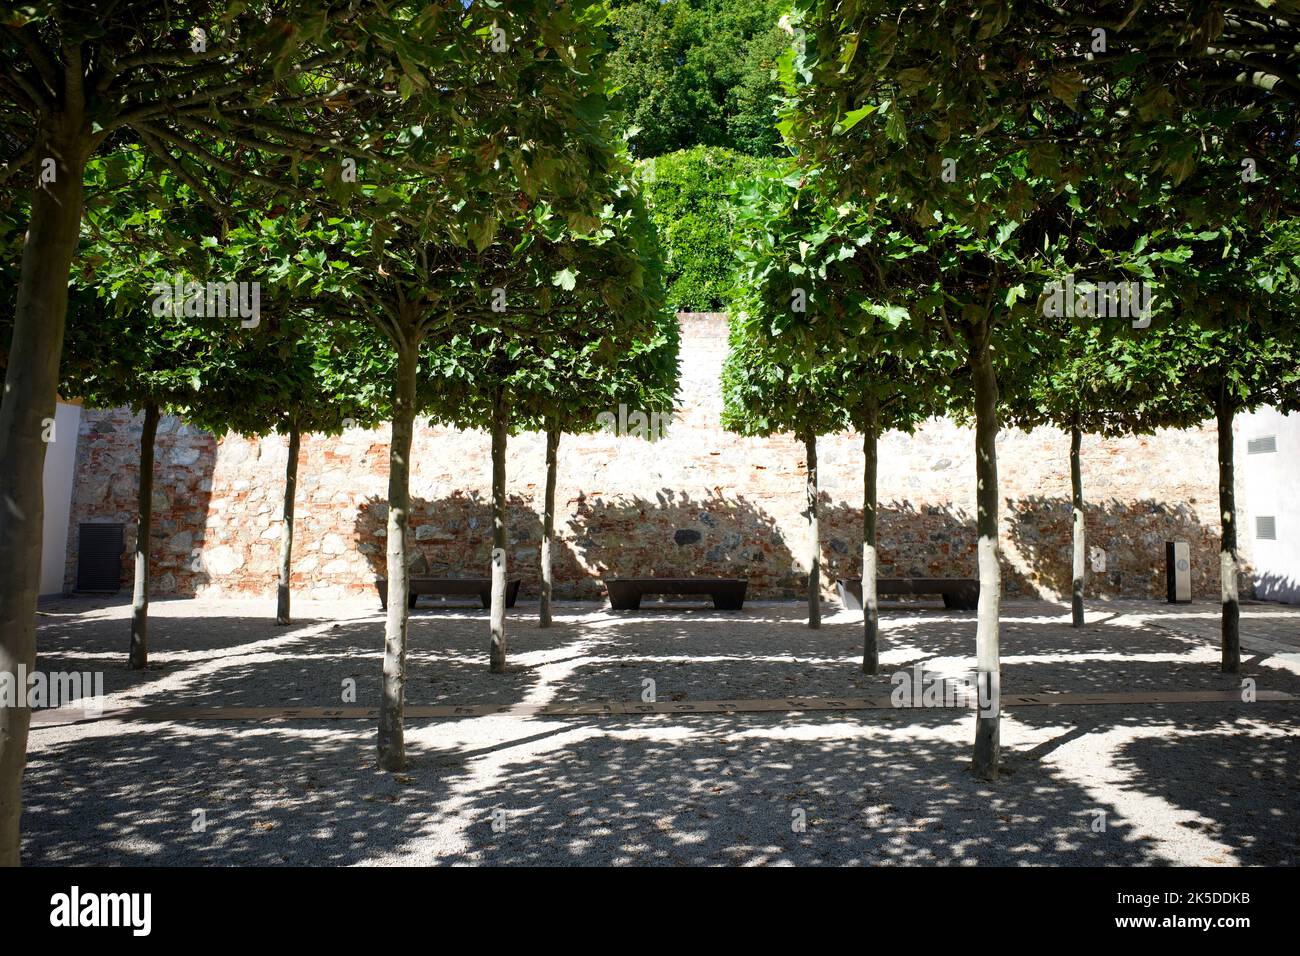 Trees were trimmed into square geometric shapes. It made the shadow into grids. Stock Photo